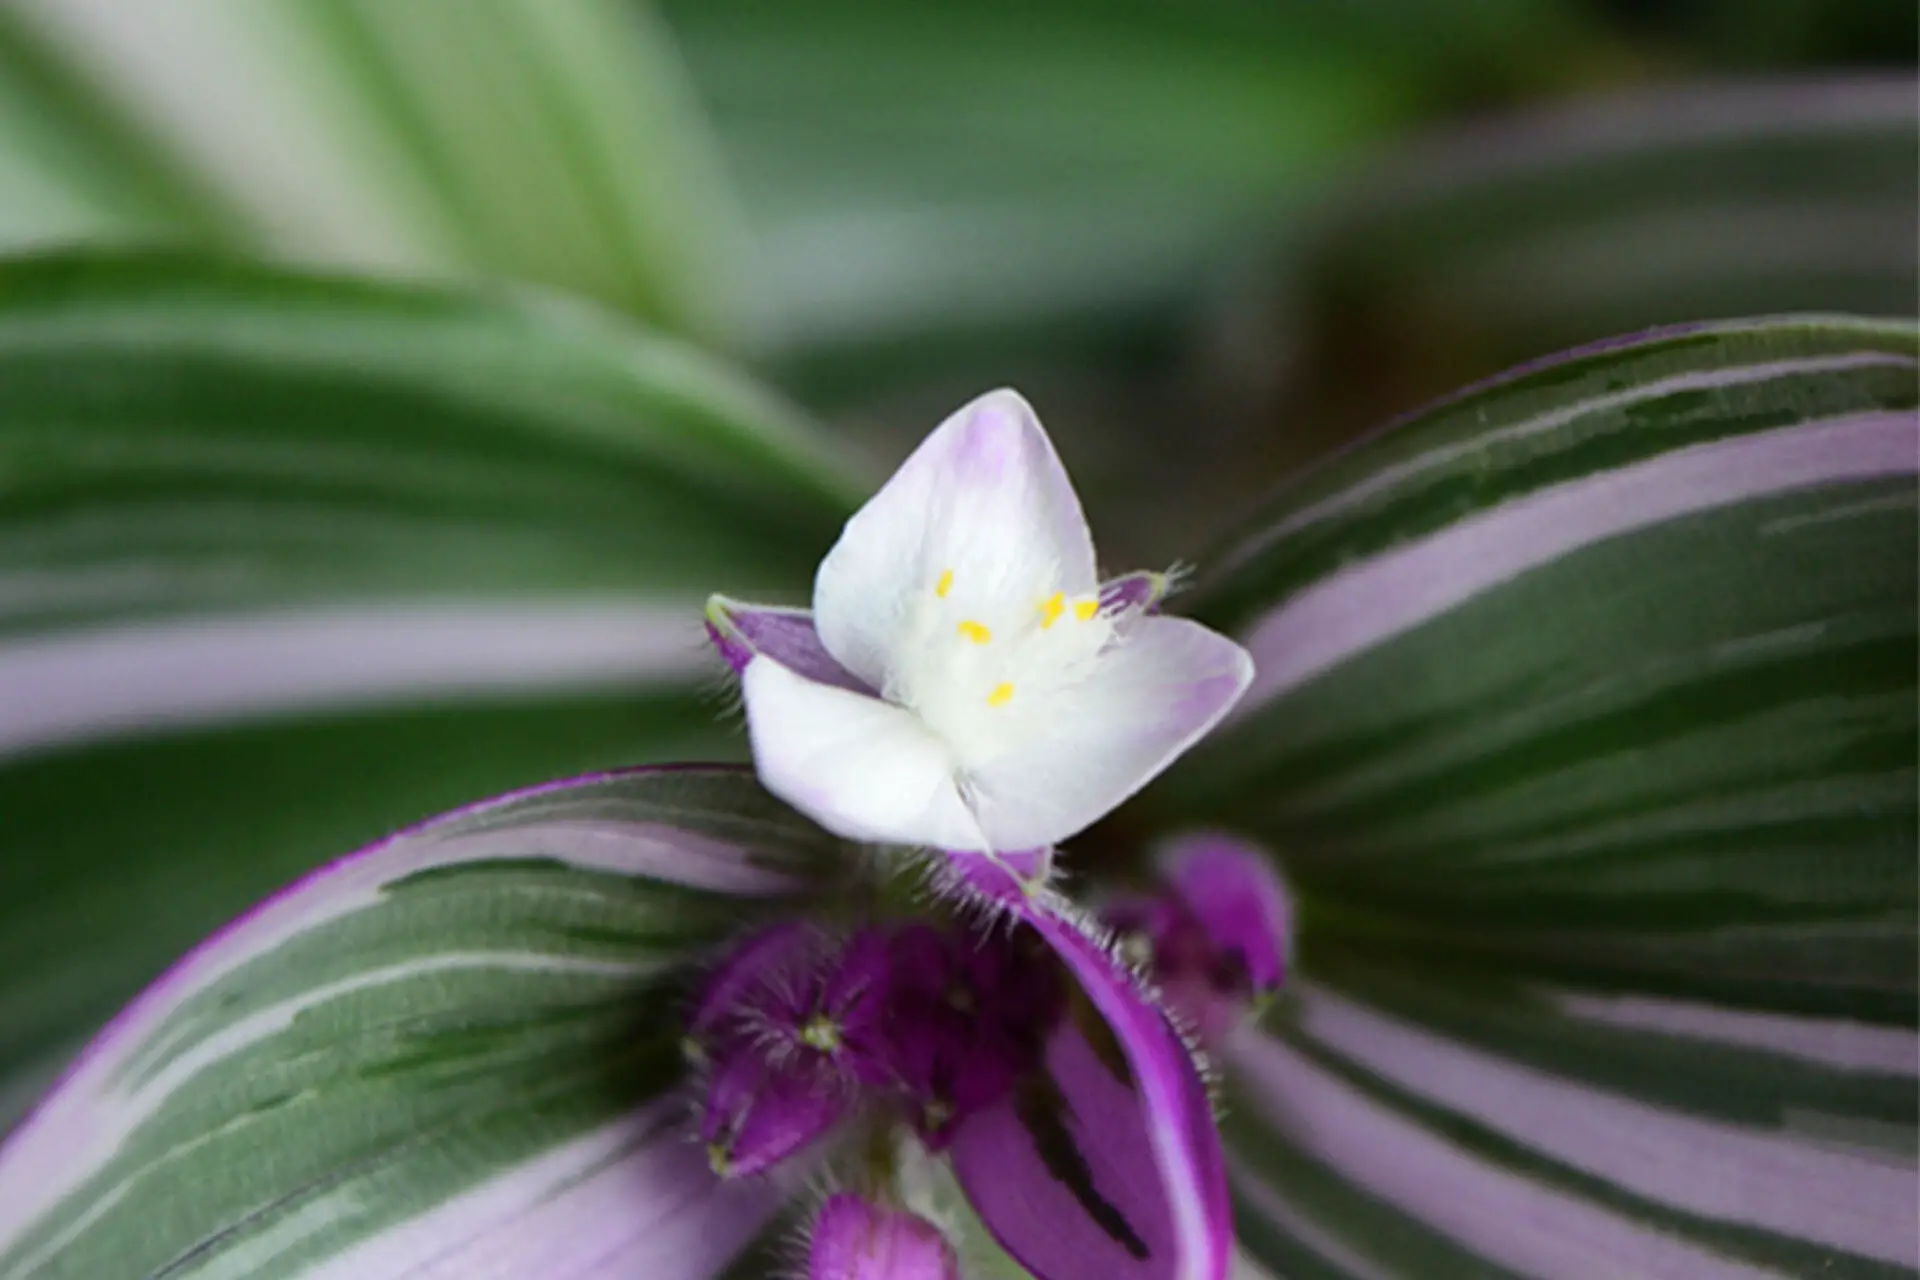 Tradescantia Nanouk with open white and purple flowers and green and pink leaves show yellow pollen